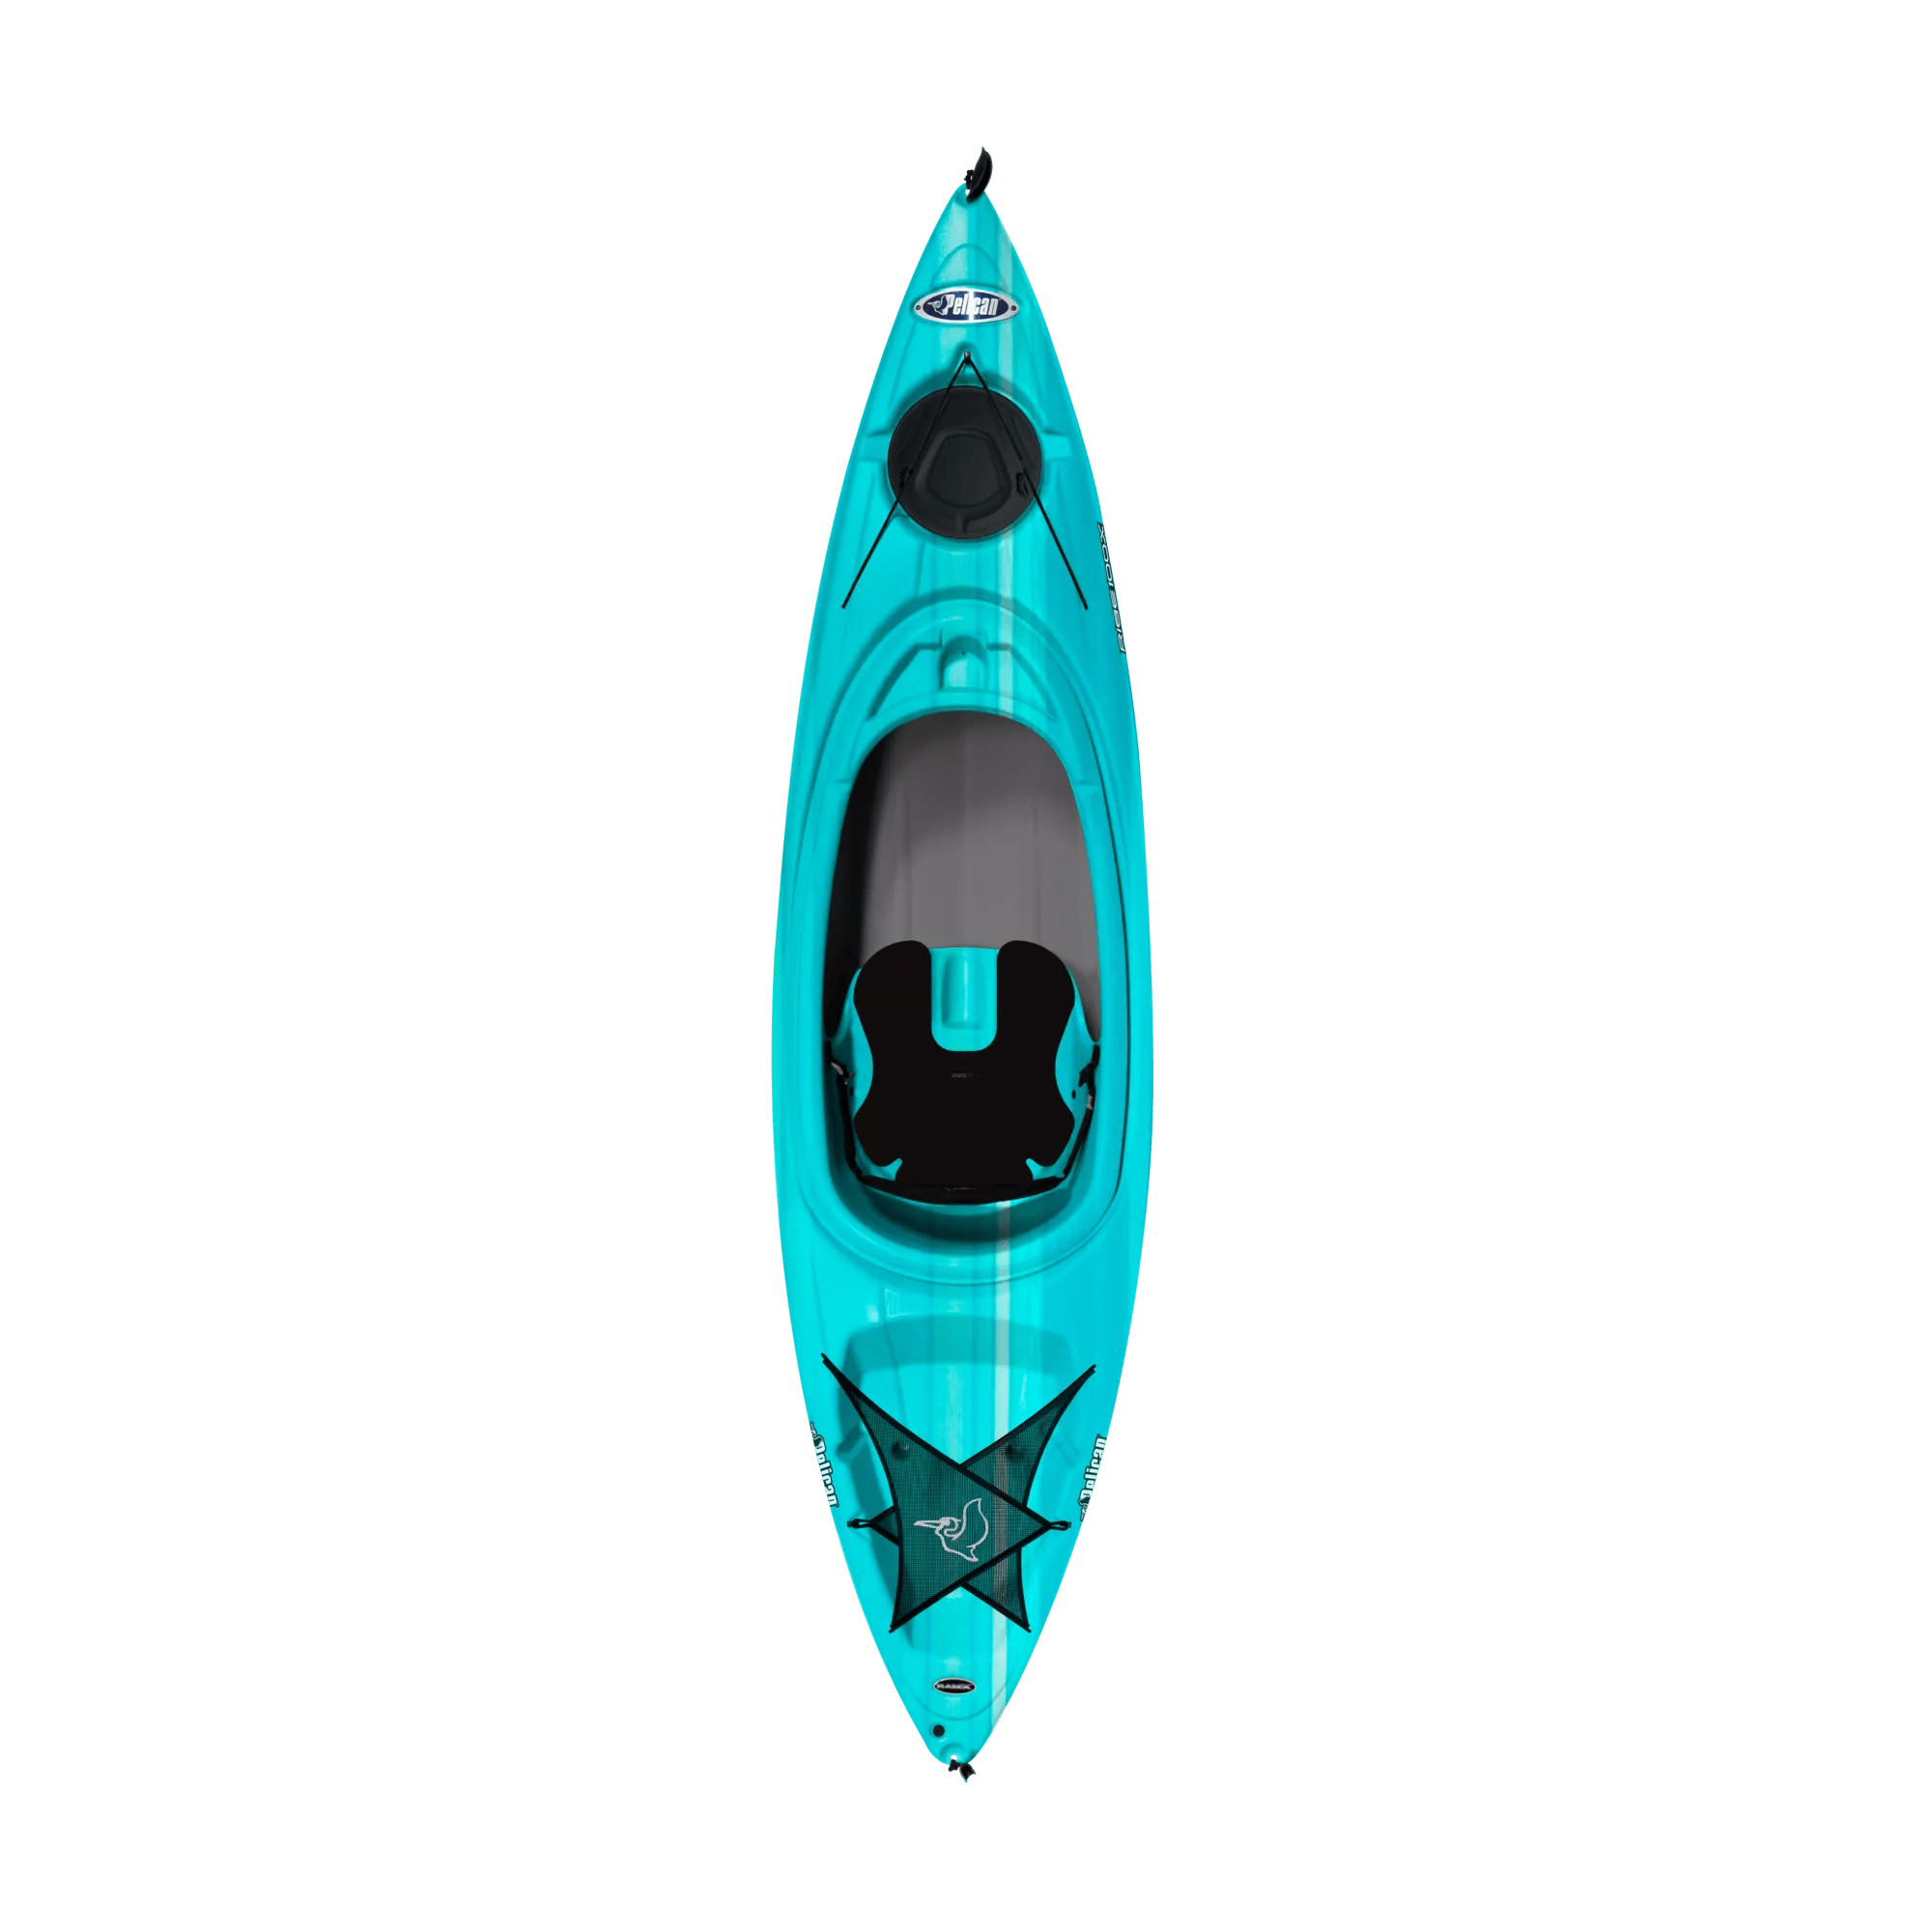 Explore the Beauty of Nature with the Pelican Rise Sit-In Kayak